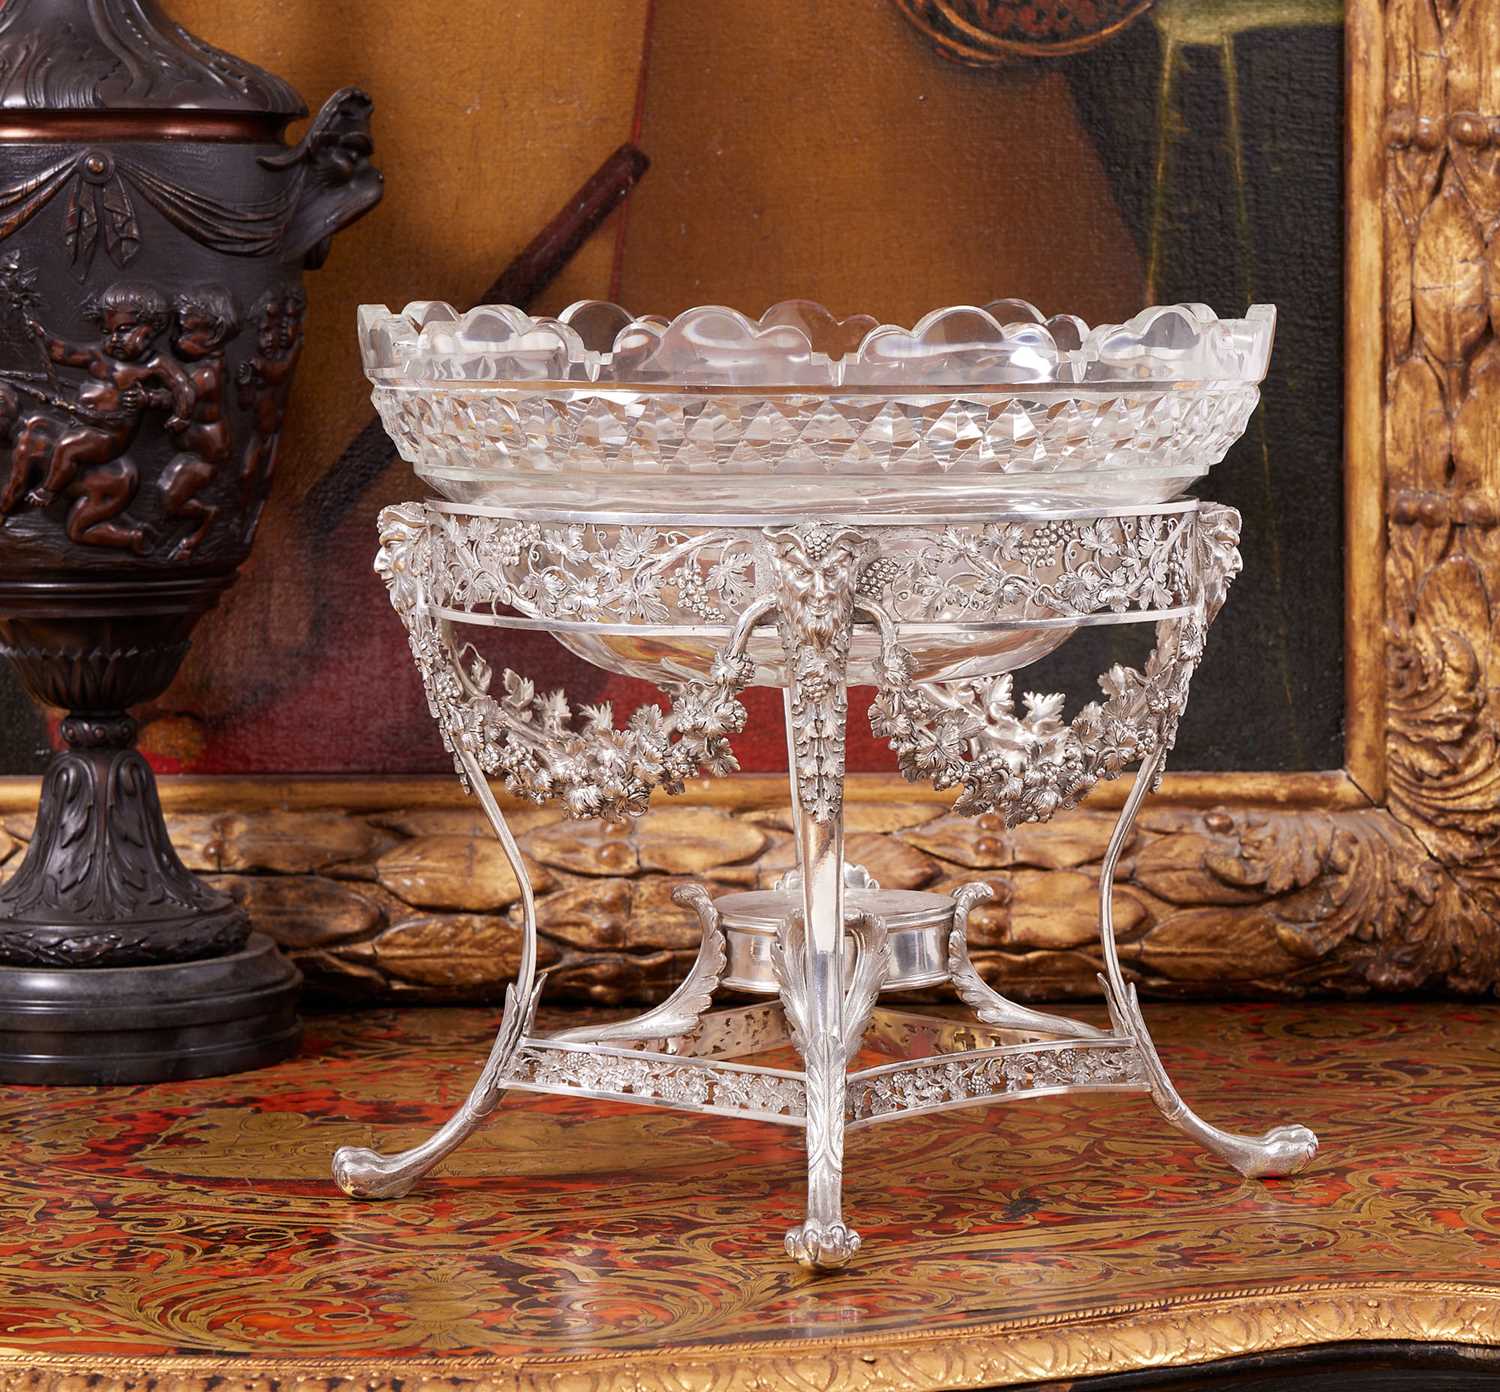 A FINE GEORGIAN STERLING SILVER AND CUT GLASS CENTREPIECE, LONDON, 1803 - Image 2 of 4